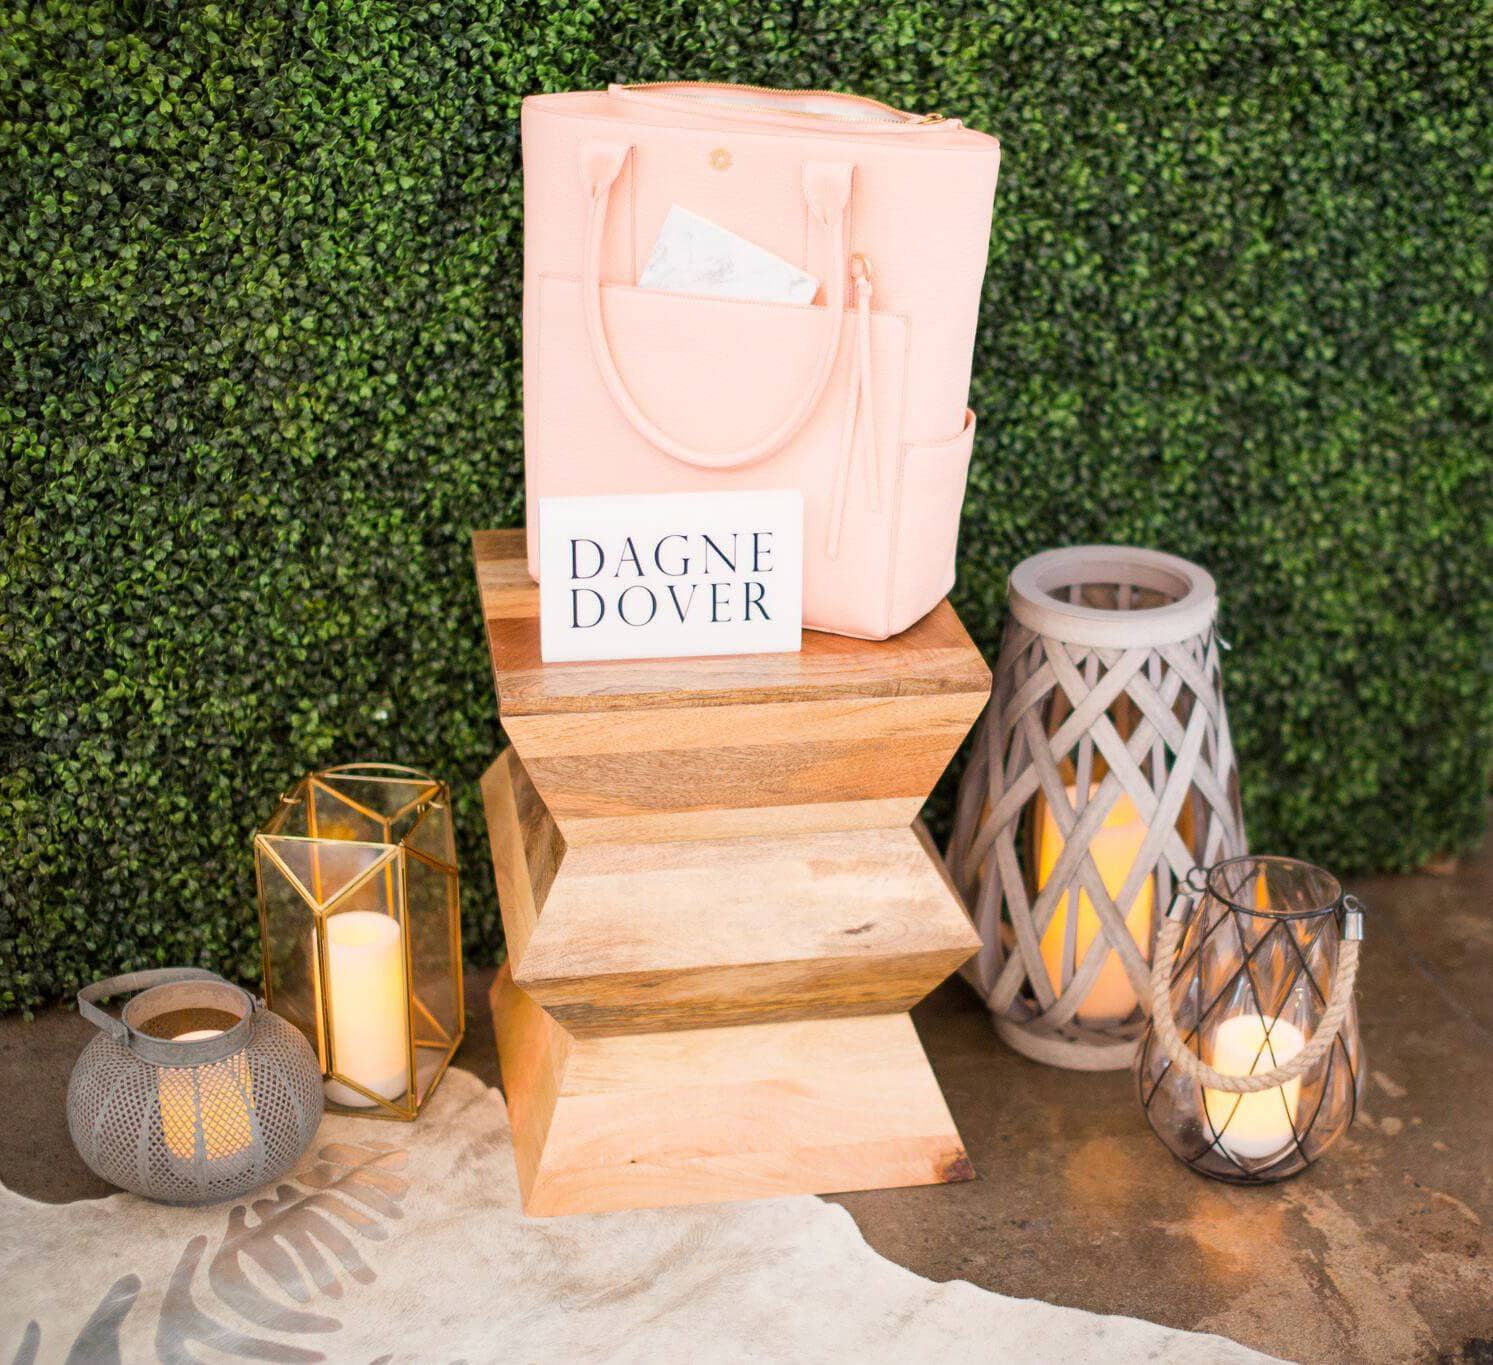 Dagne Dover Display | Create + Cultivate Los Angeles 2016 Conference Recap + Review | Beauty and Style Blogger Ashley Brooke Nicholas